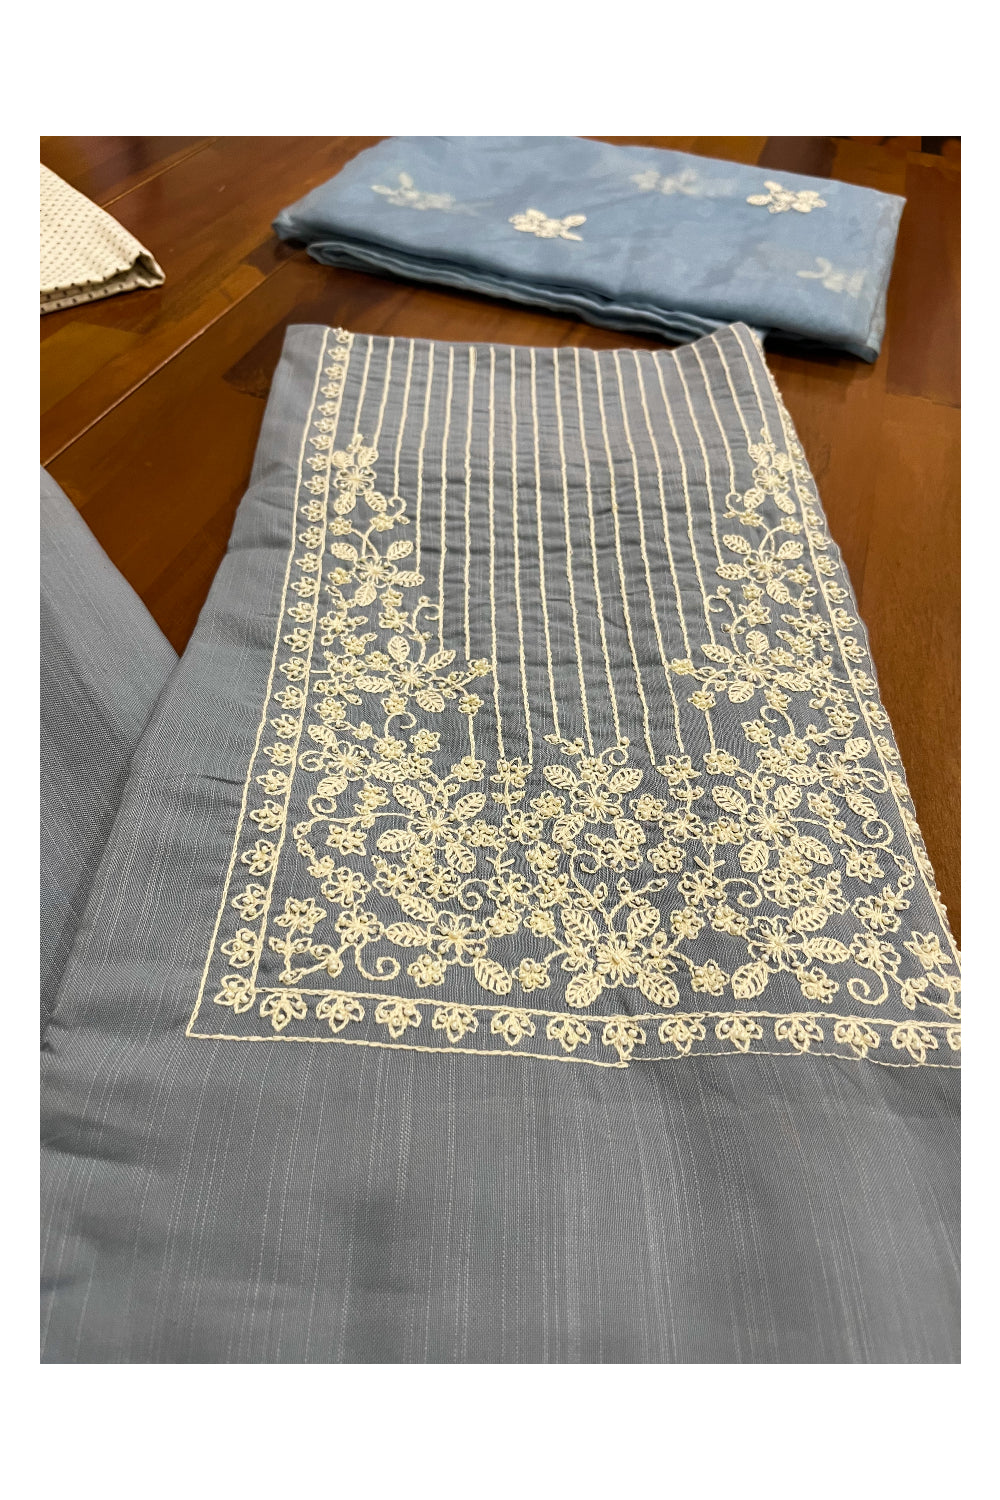 Southloom™ Cotton Churidar Salwar Suit Material in Blue with Thread Works